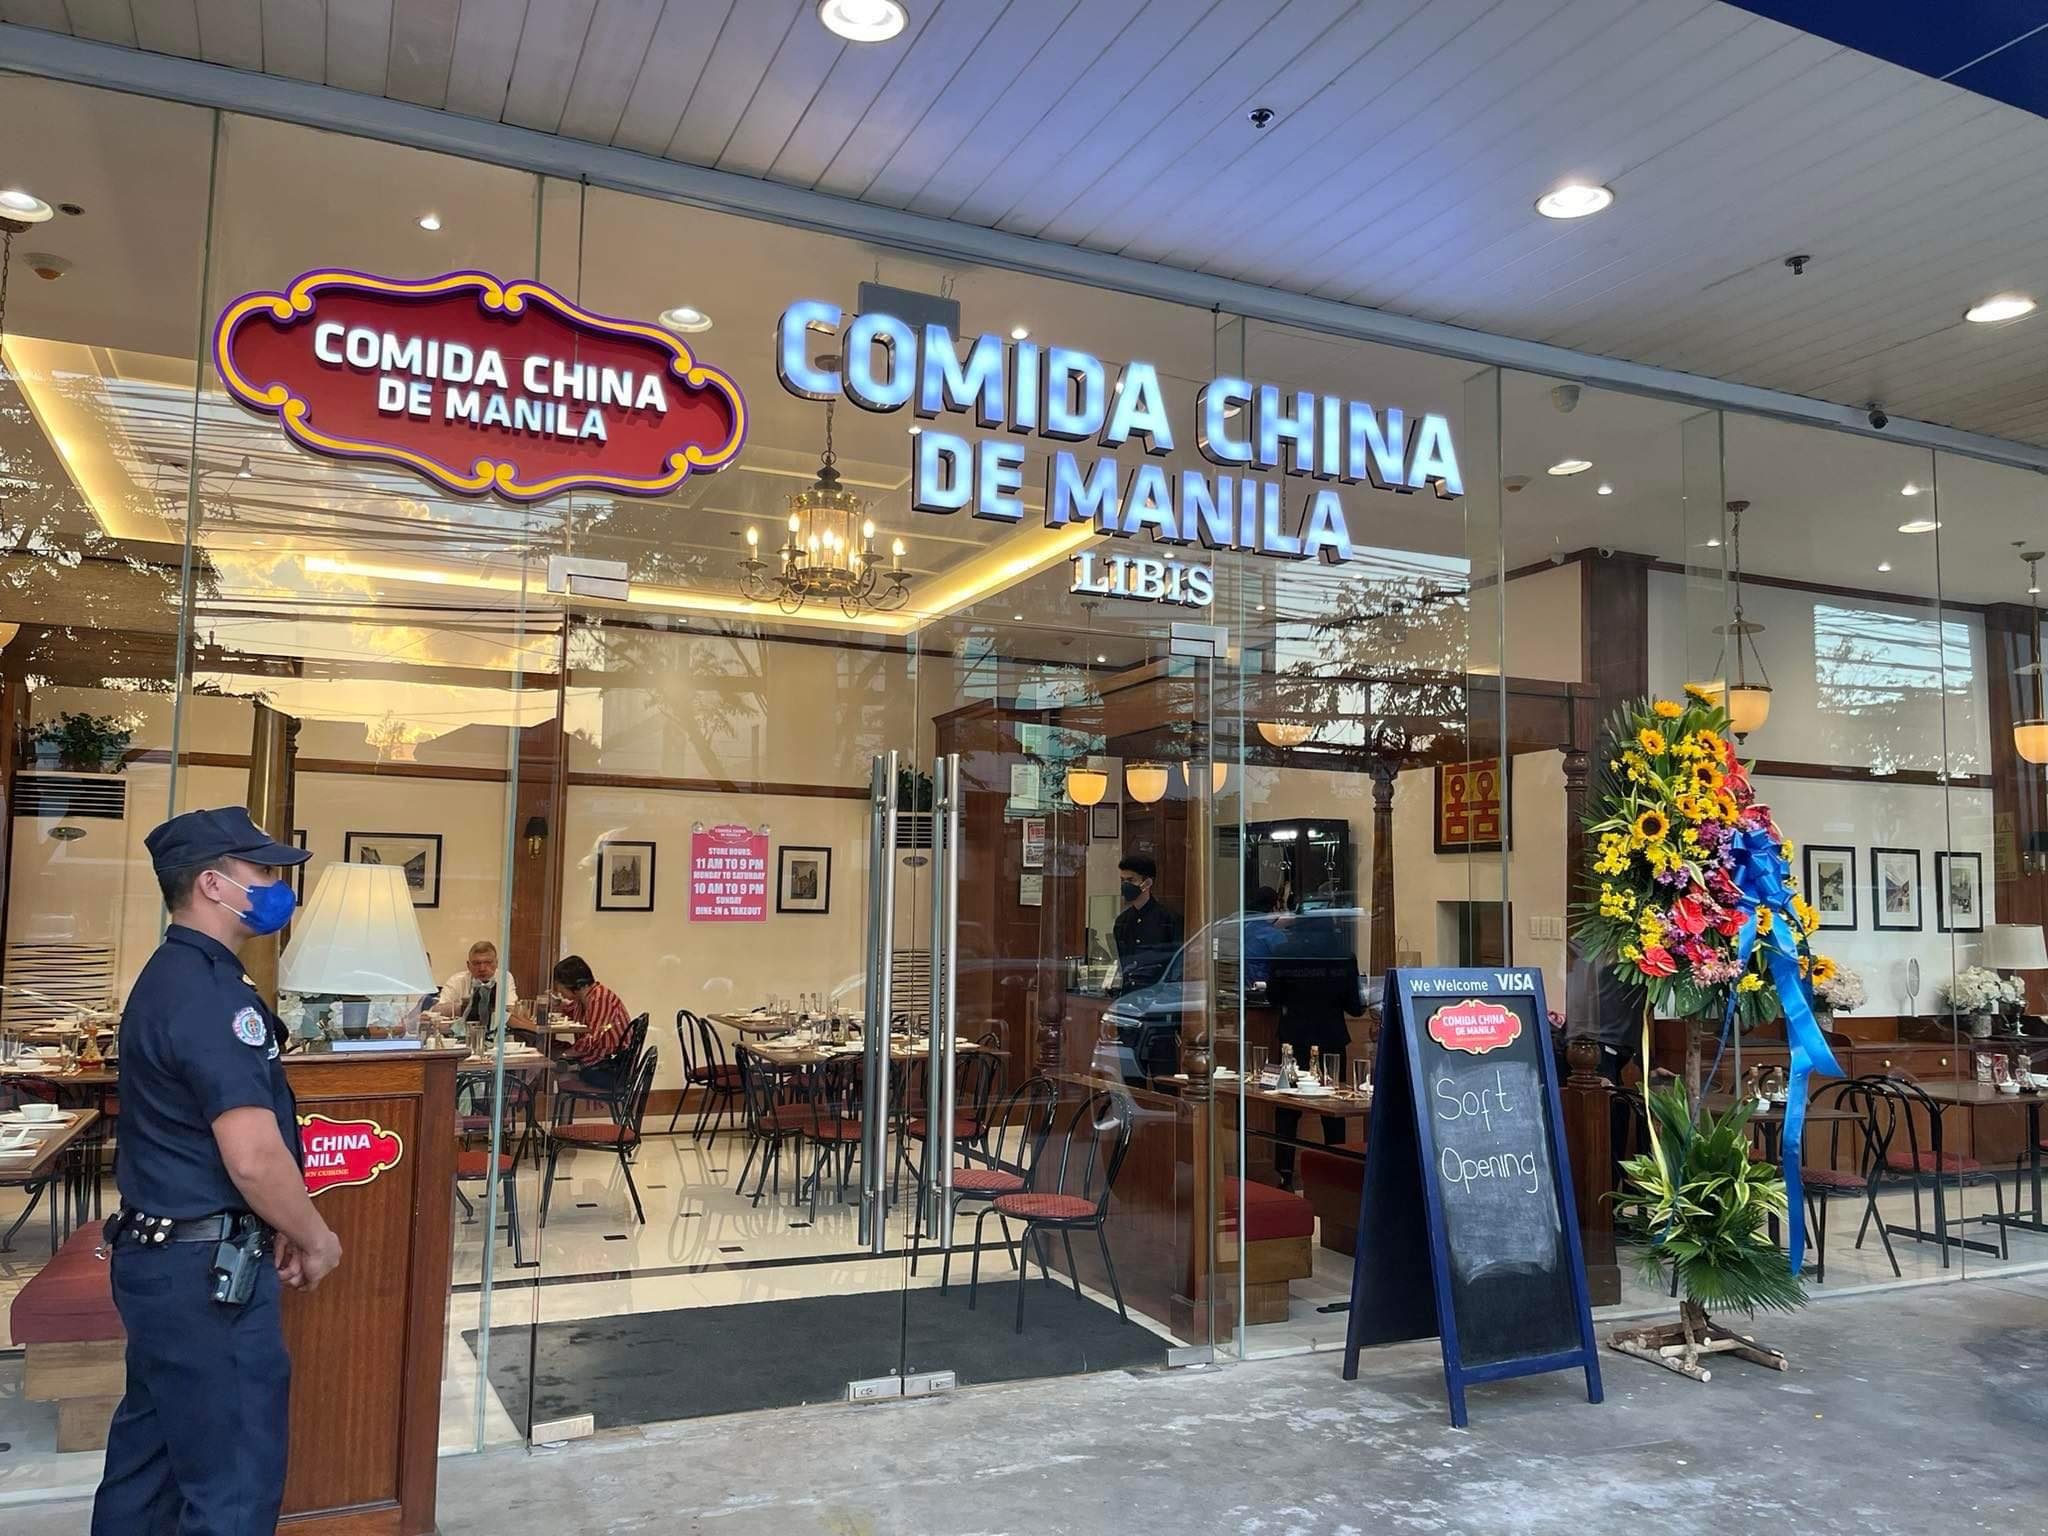 Back in business! Comida China de Manila reopens in new location